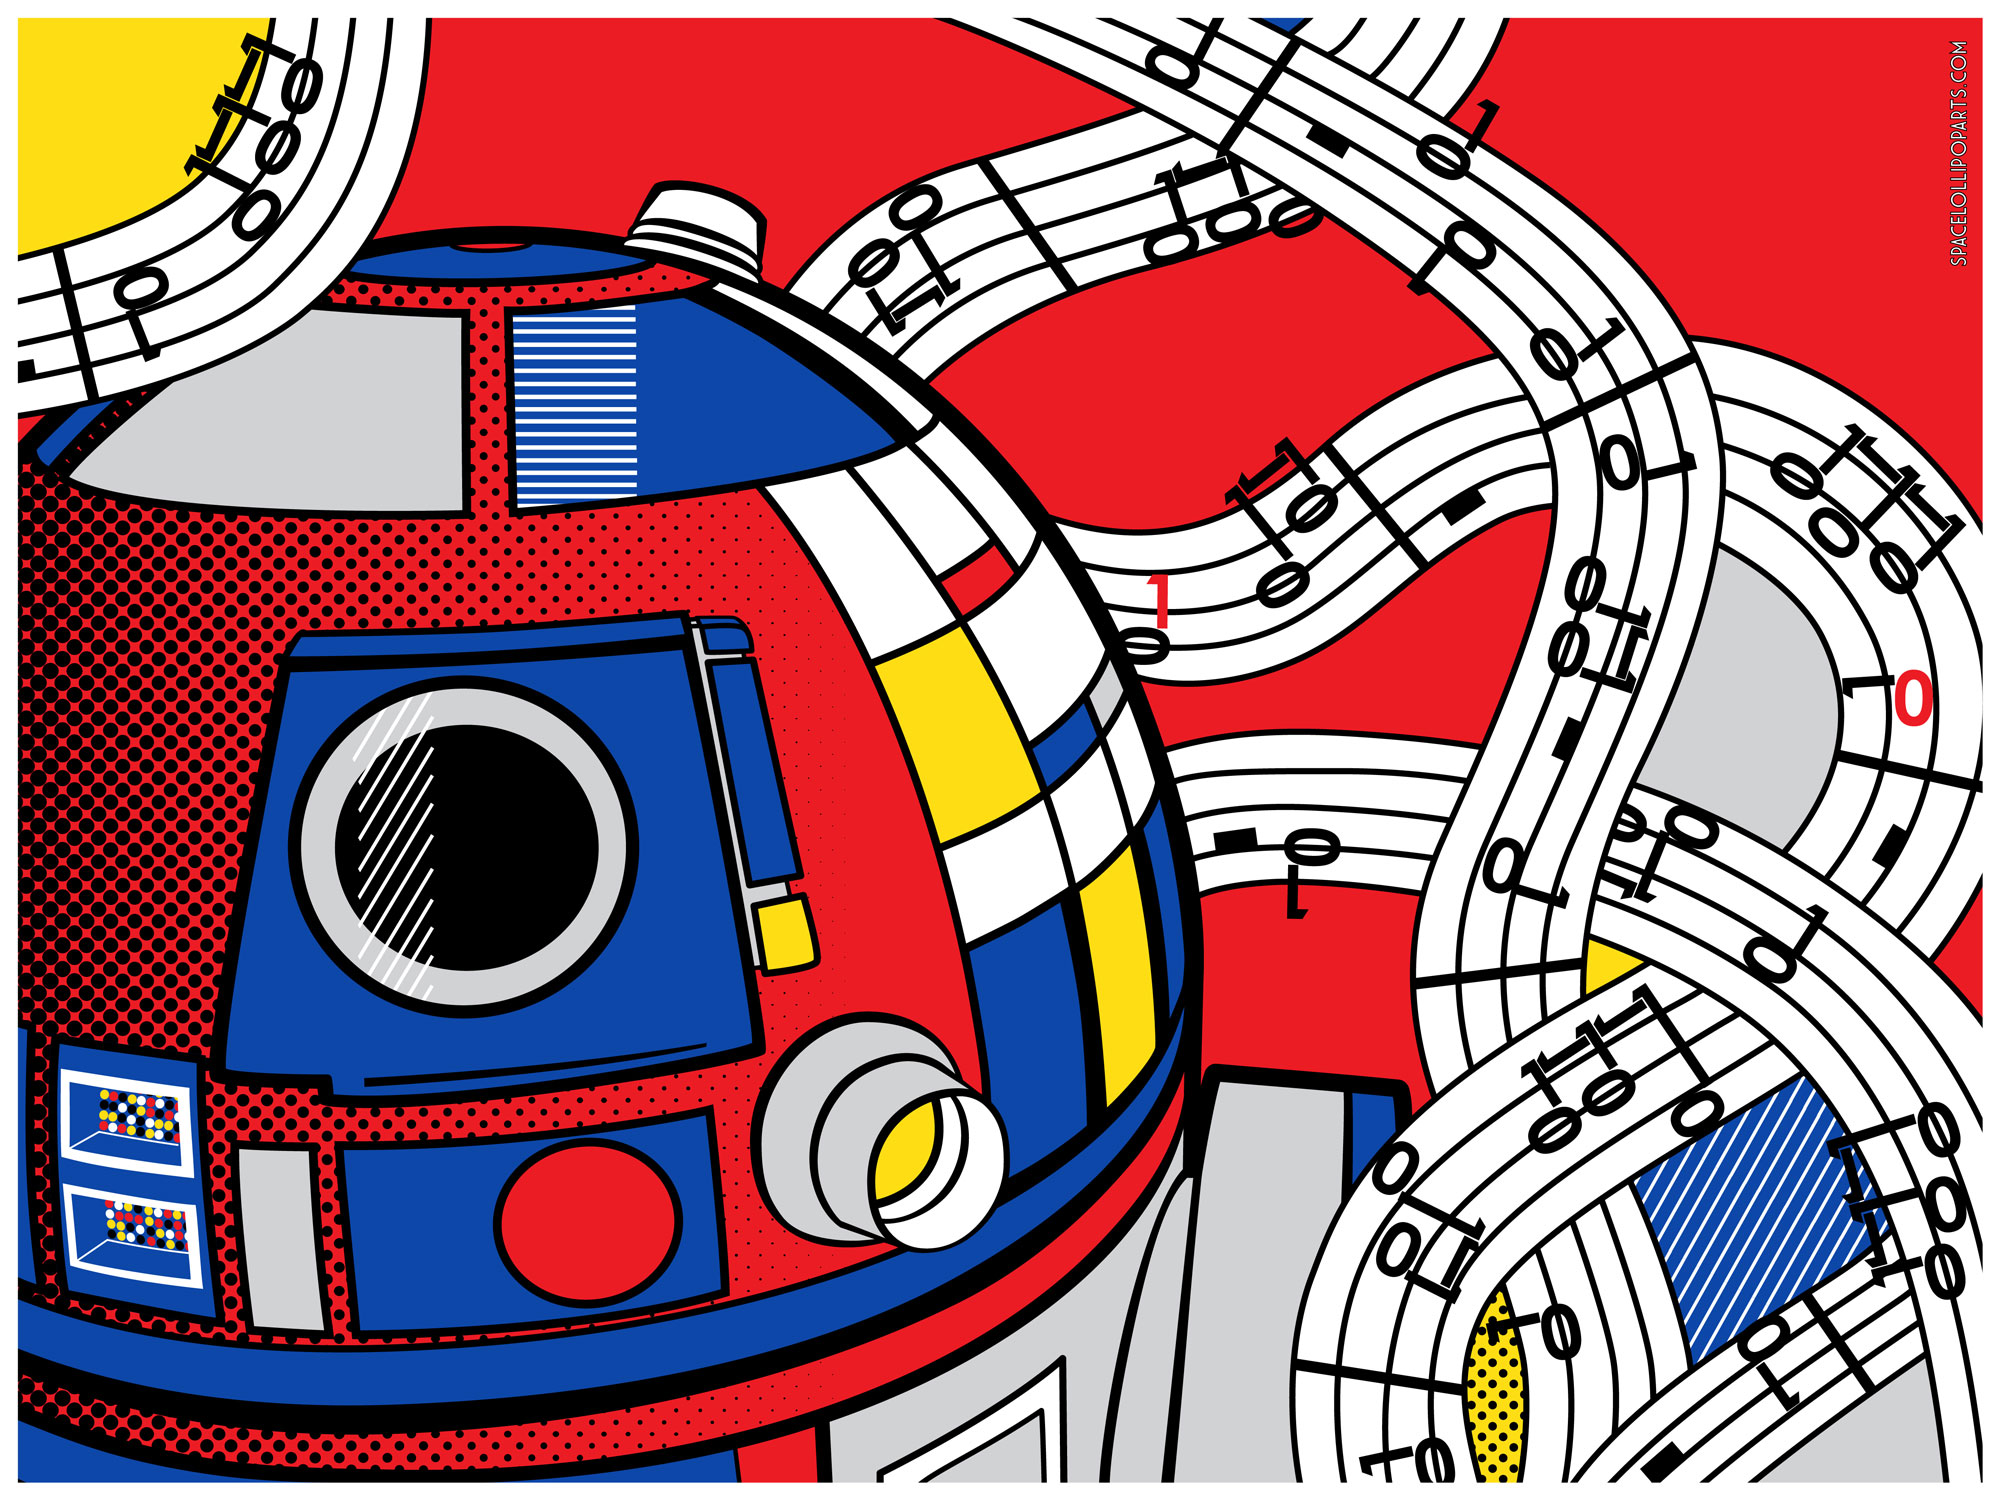 Abstract R2D2 in Mondrian style